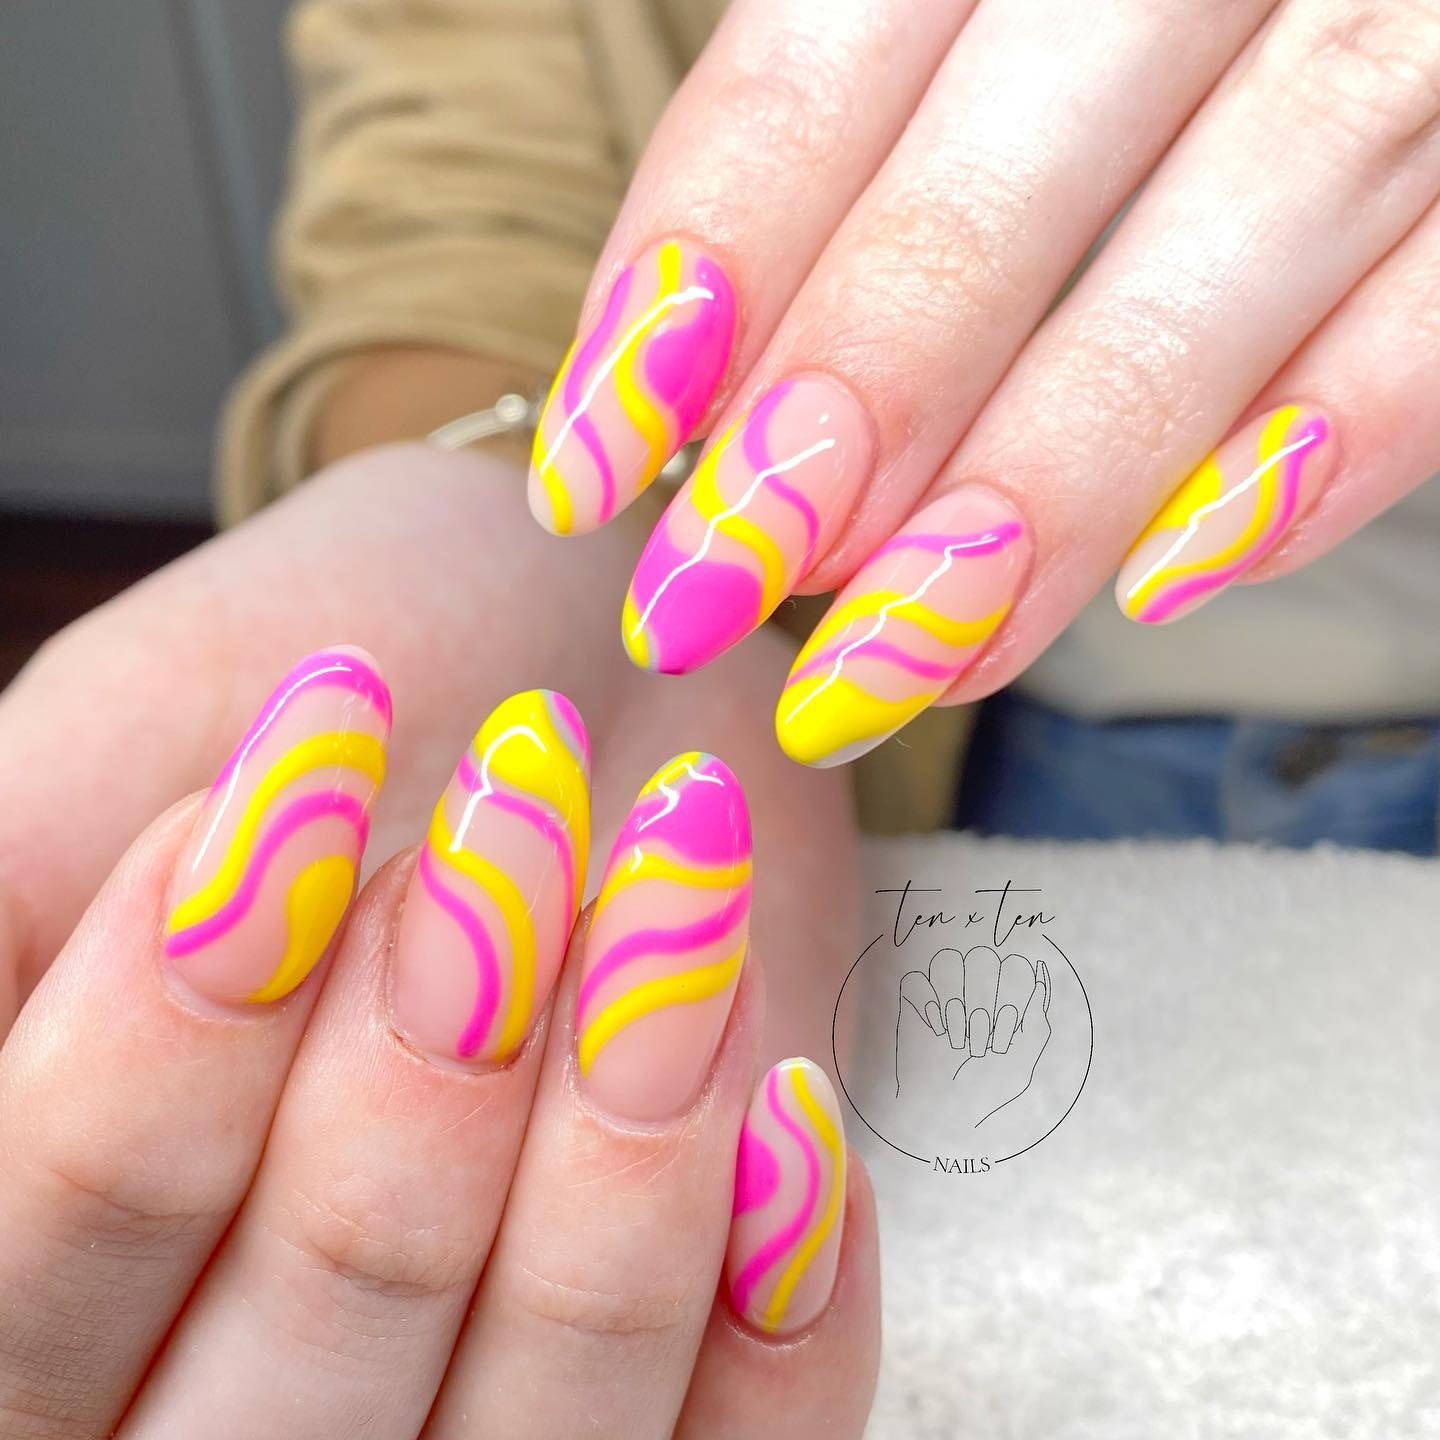 Yellow nail art designs – fantastic manicure ideas for a sunny mood